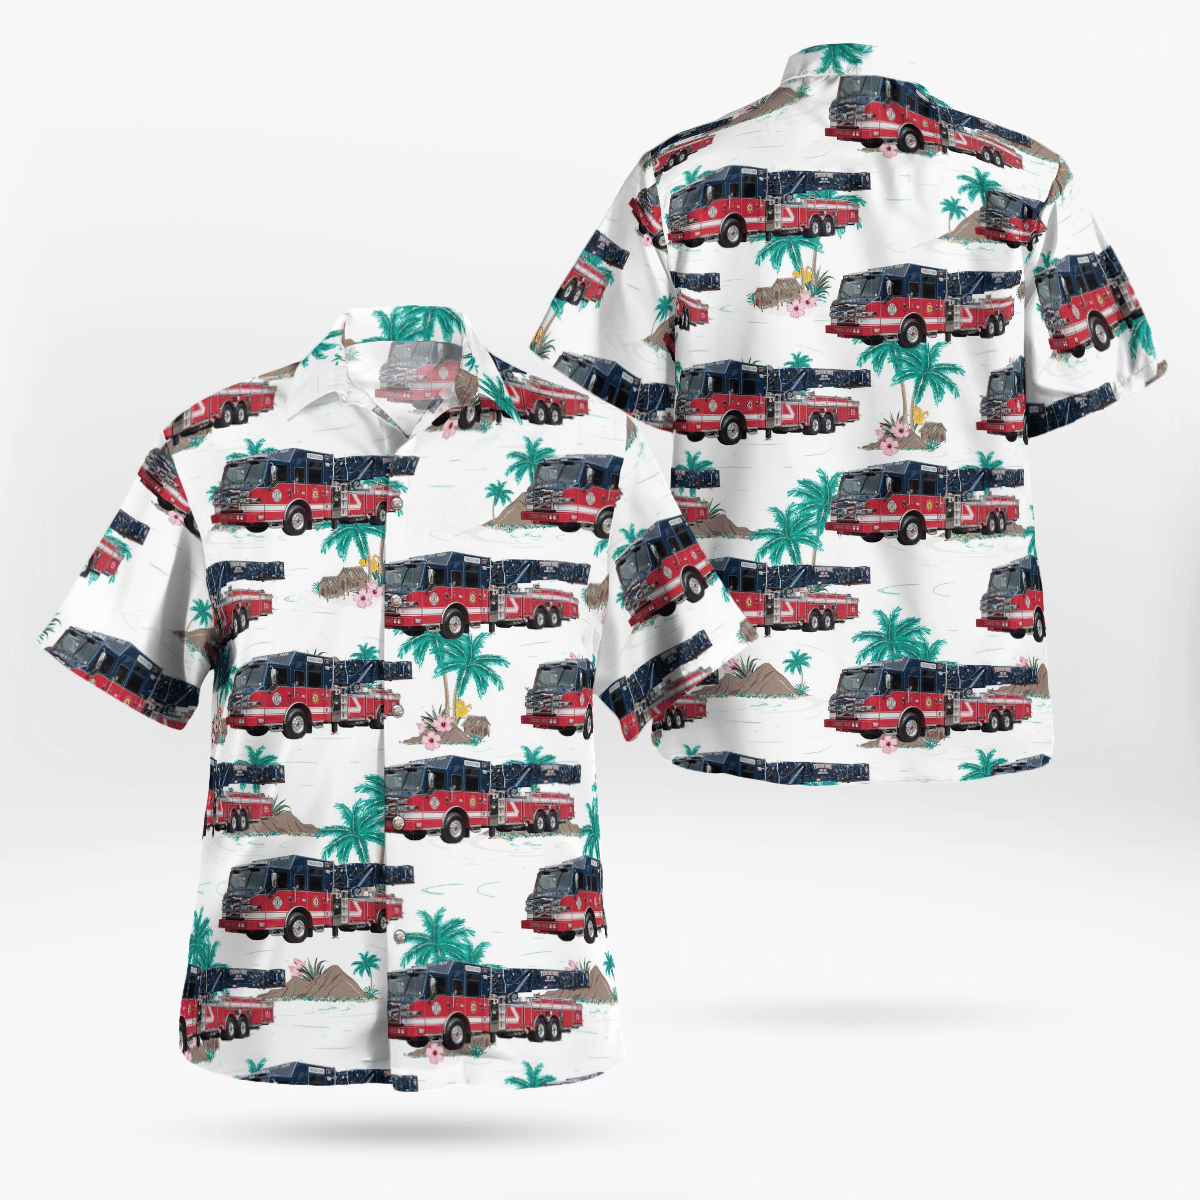 If you want to be noticed, wear These Trendy Hawaiian Shirt 140